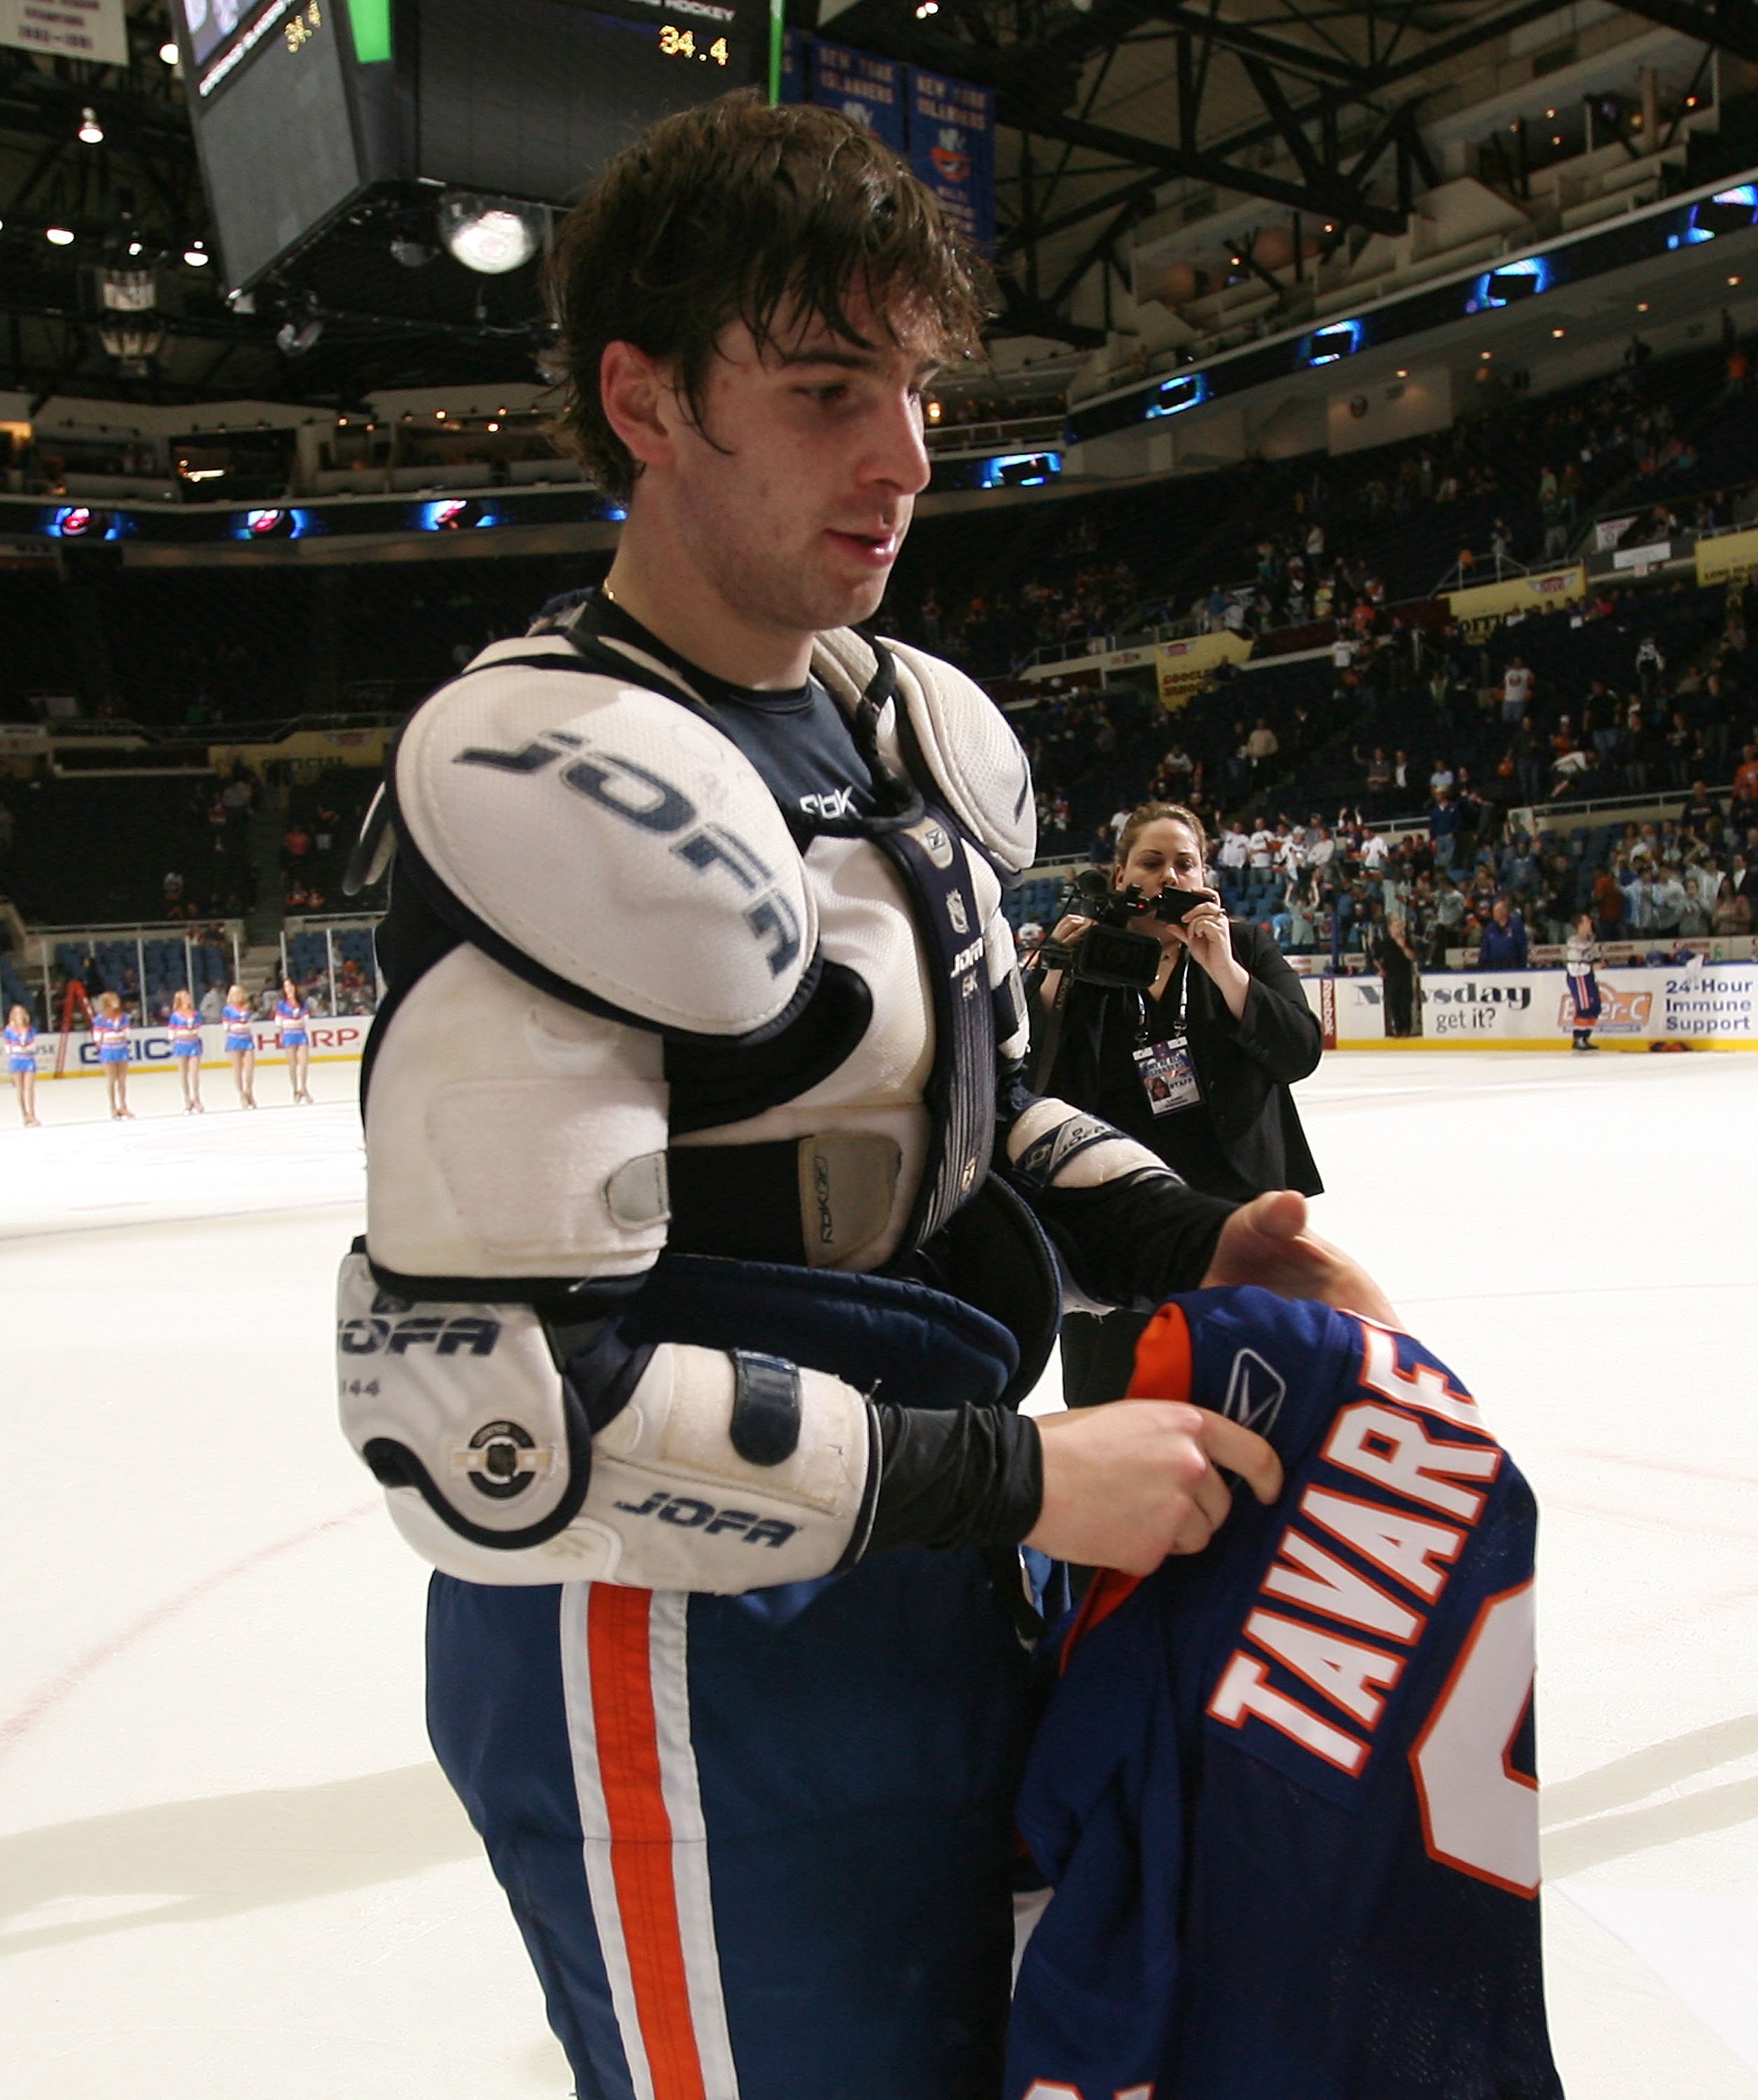 UNIONDALE, NY - APRIL 11: John Tavares #91 of the New York Islanders signs autographs for fans following his game against the Pittsburgh Penguins at the Nassau Coliseum on April 11, 2010 in Uniondale, New York. (Photo by Bruce Bennett/Getty Images)